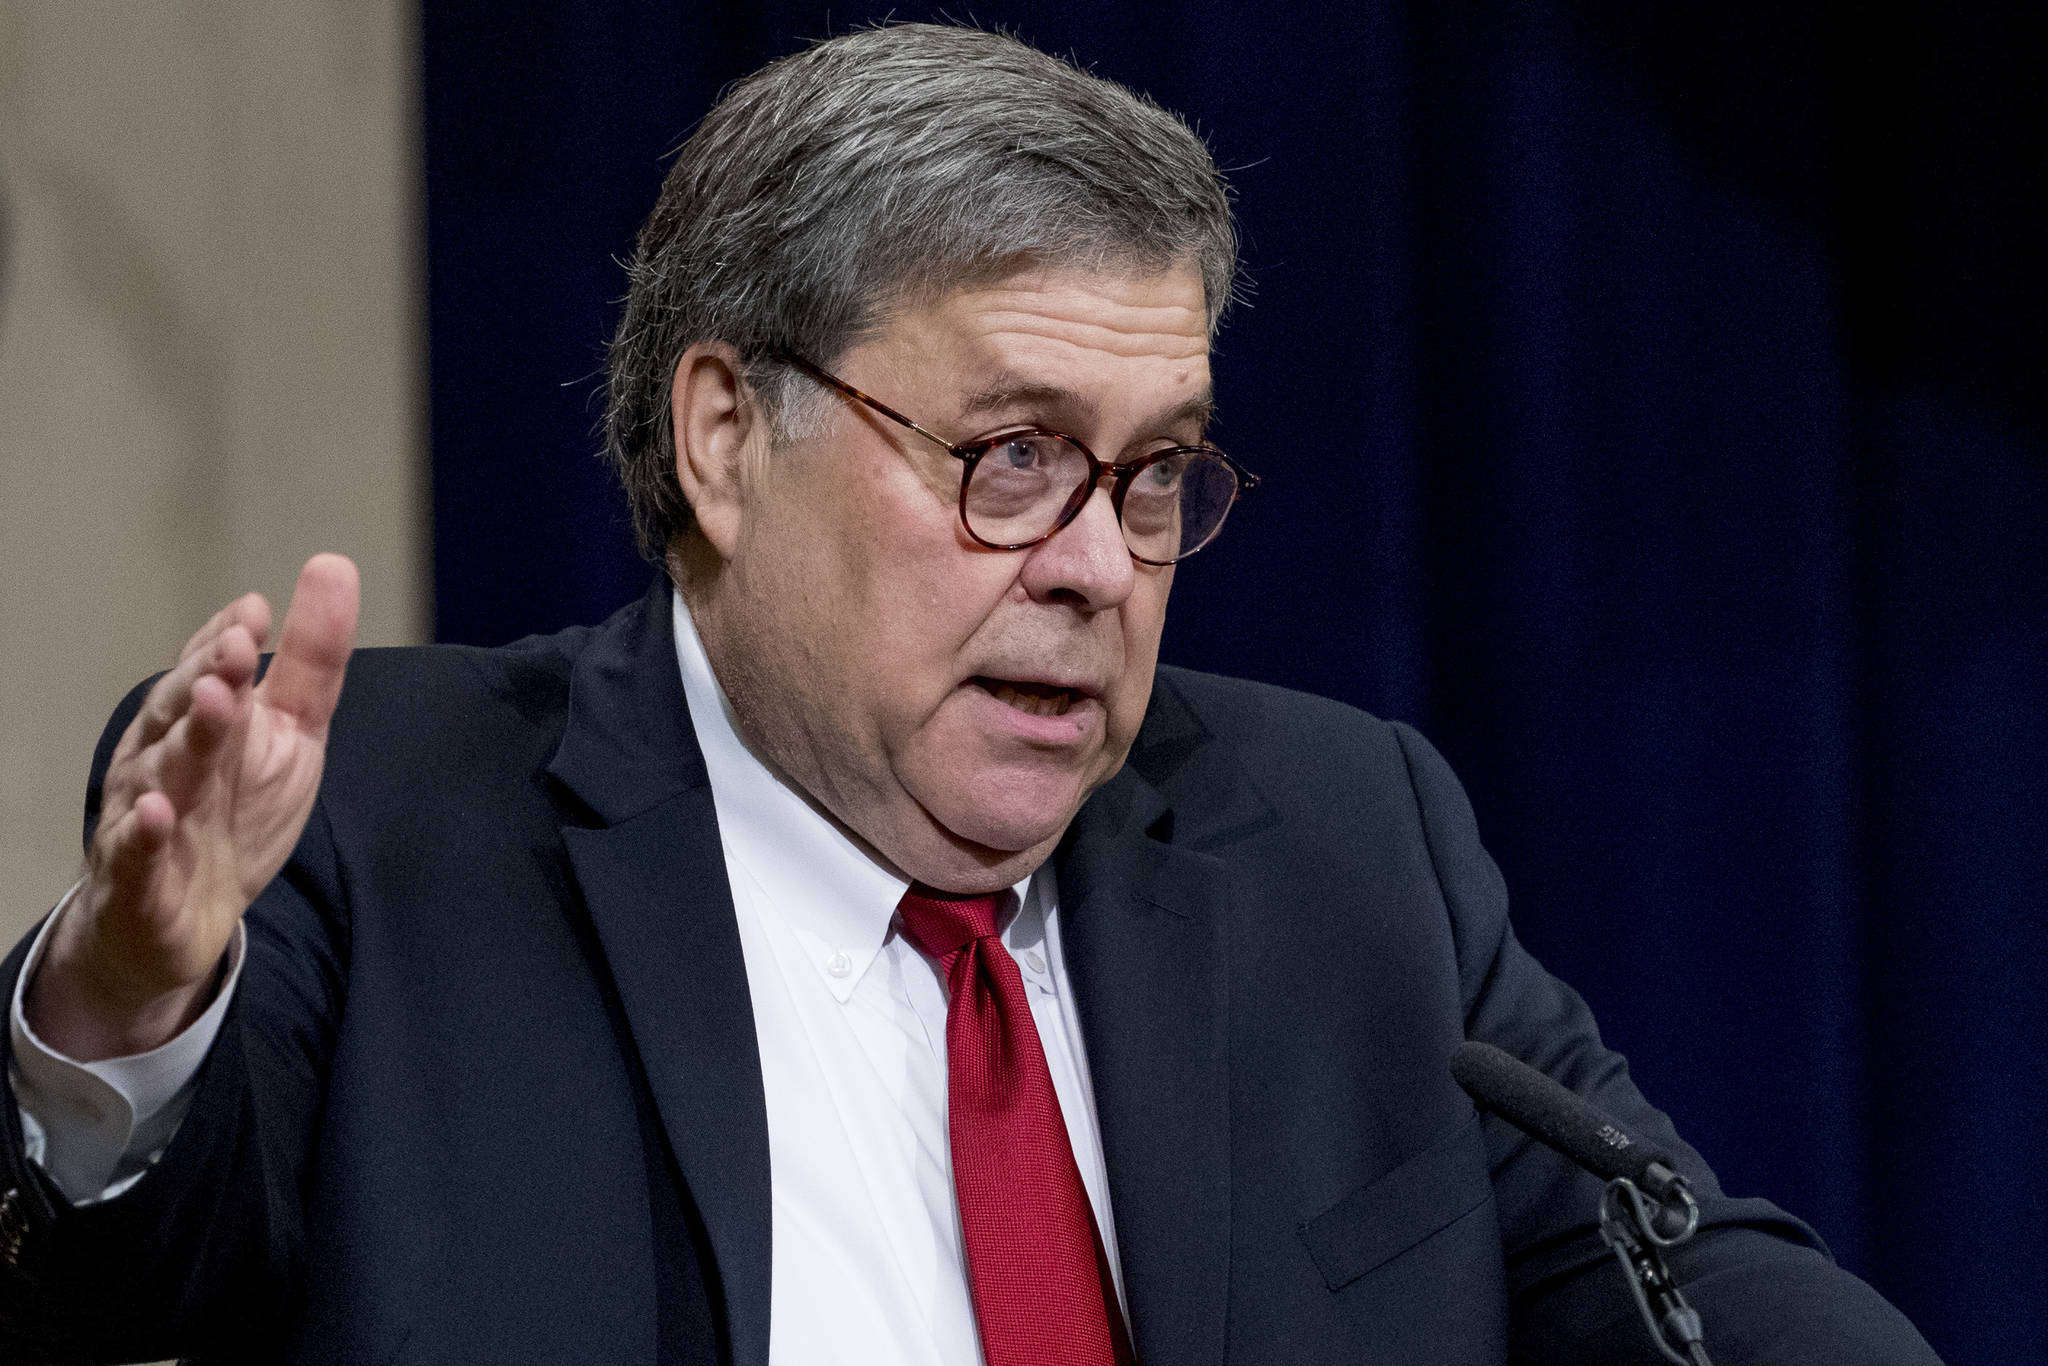 Attorney General William Barr speaks at the U.S. Attorneys’ National Conference at the Department of Justice in Washington, Wednesday, June 26, 2019. (AP Photo/Andrew Harnik)